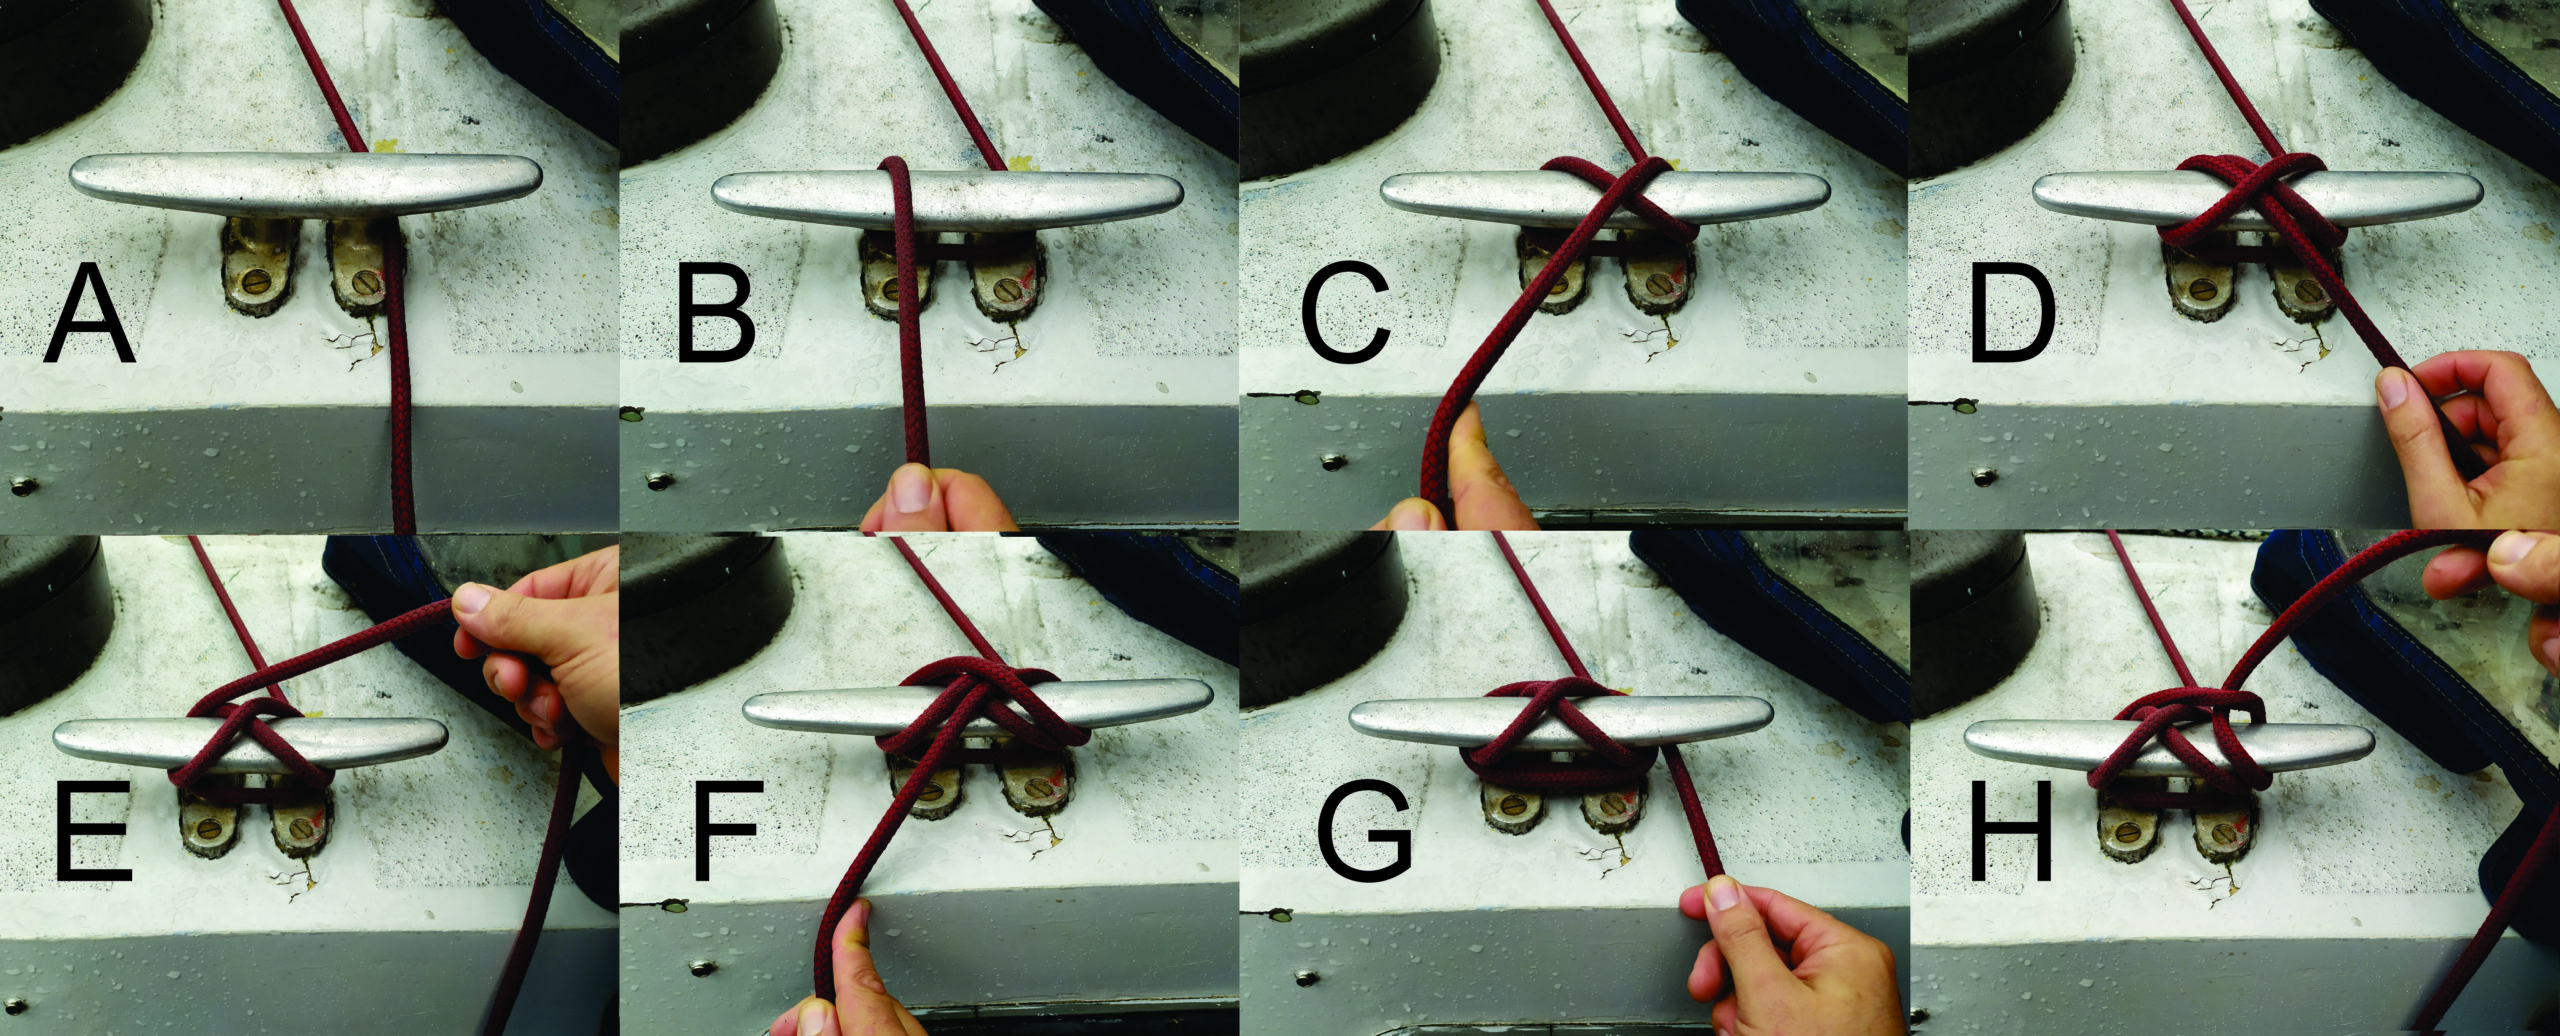 These are the steps to tie a proper cleat hitch knot.